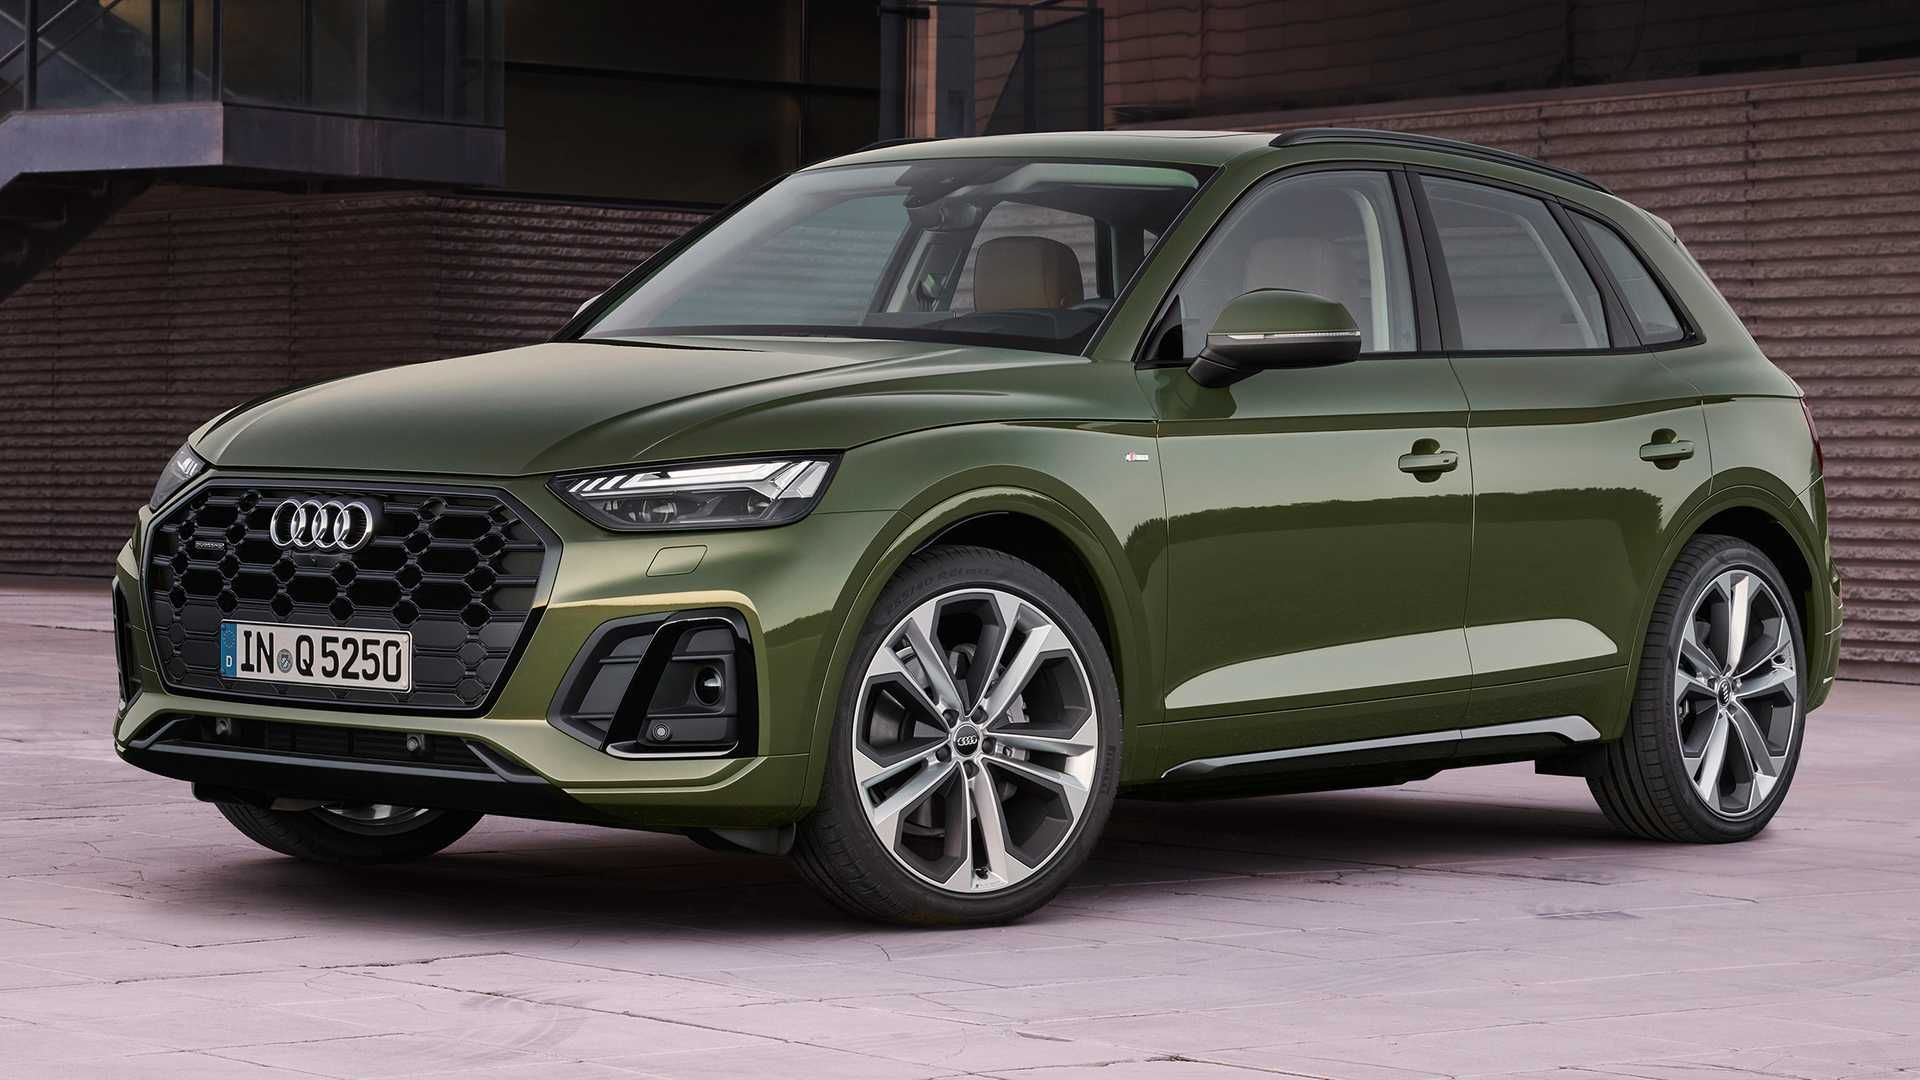 These Are The Main Differences Between The Audi Q3 and Q5